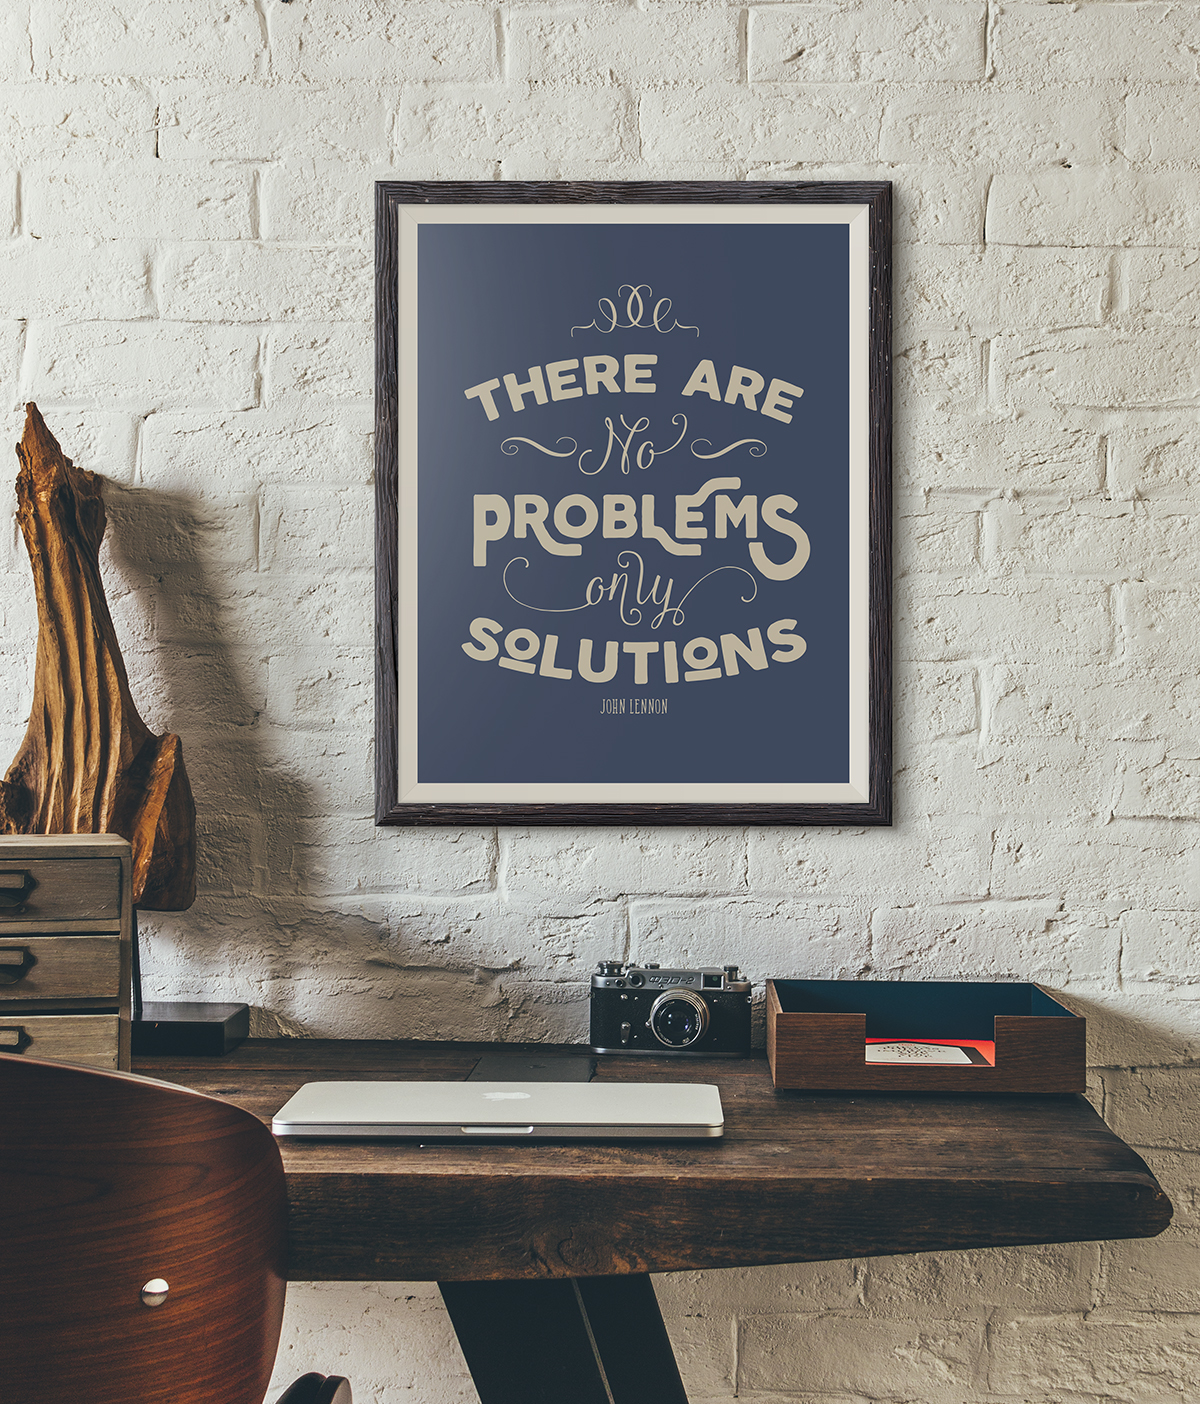 John Lennon Free Art Printable: There Are No Problems Only Solutions • Little Gold Pixel